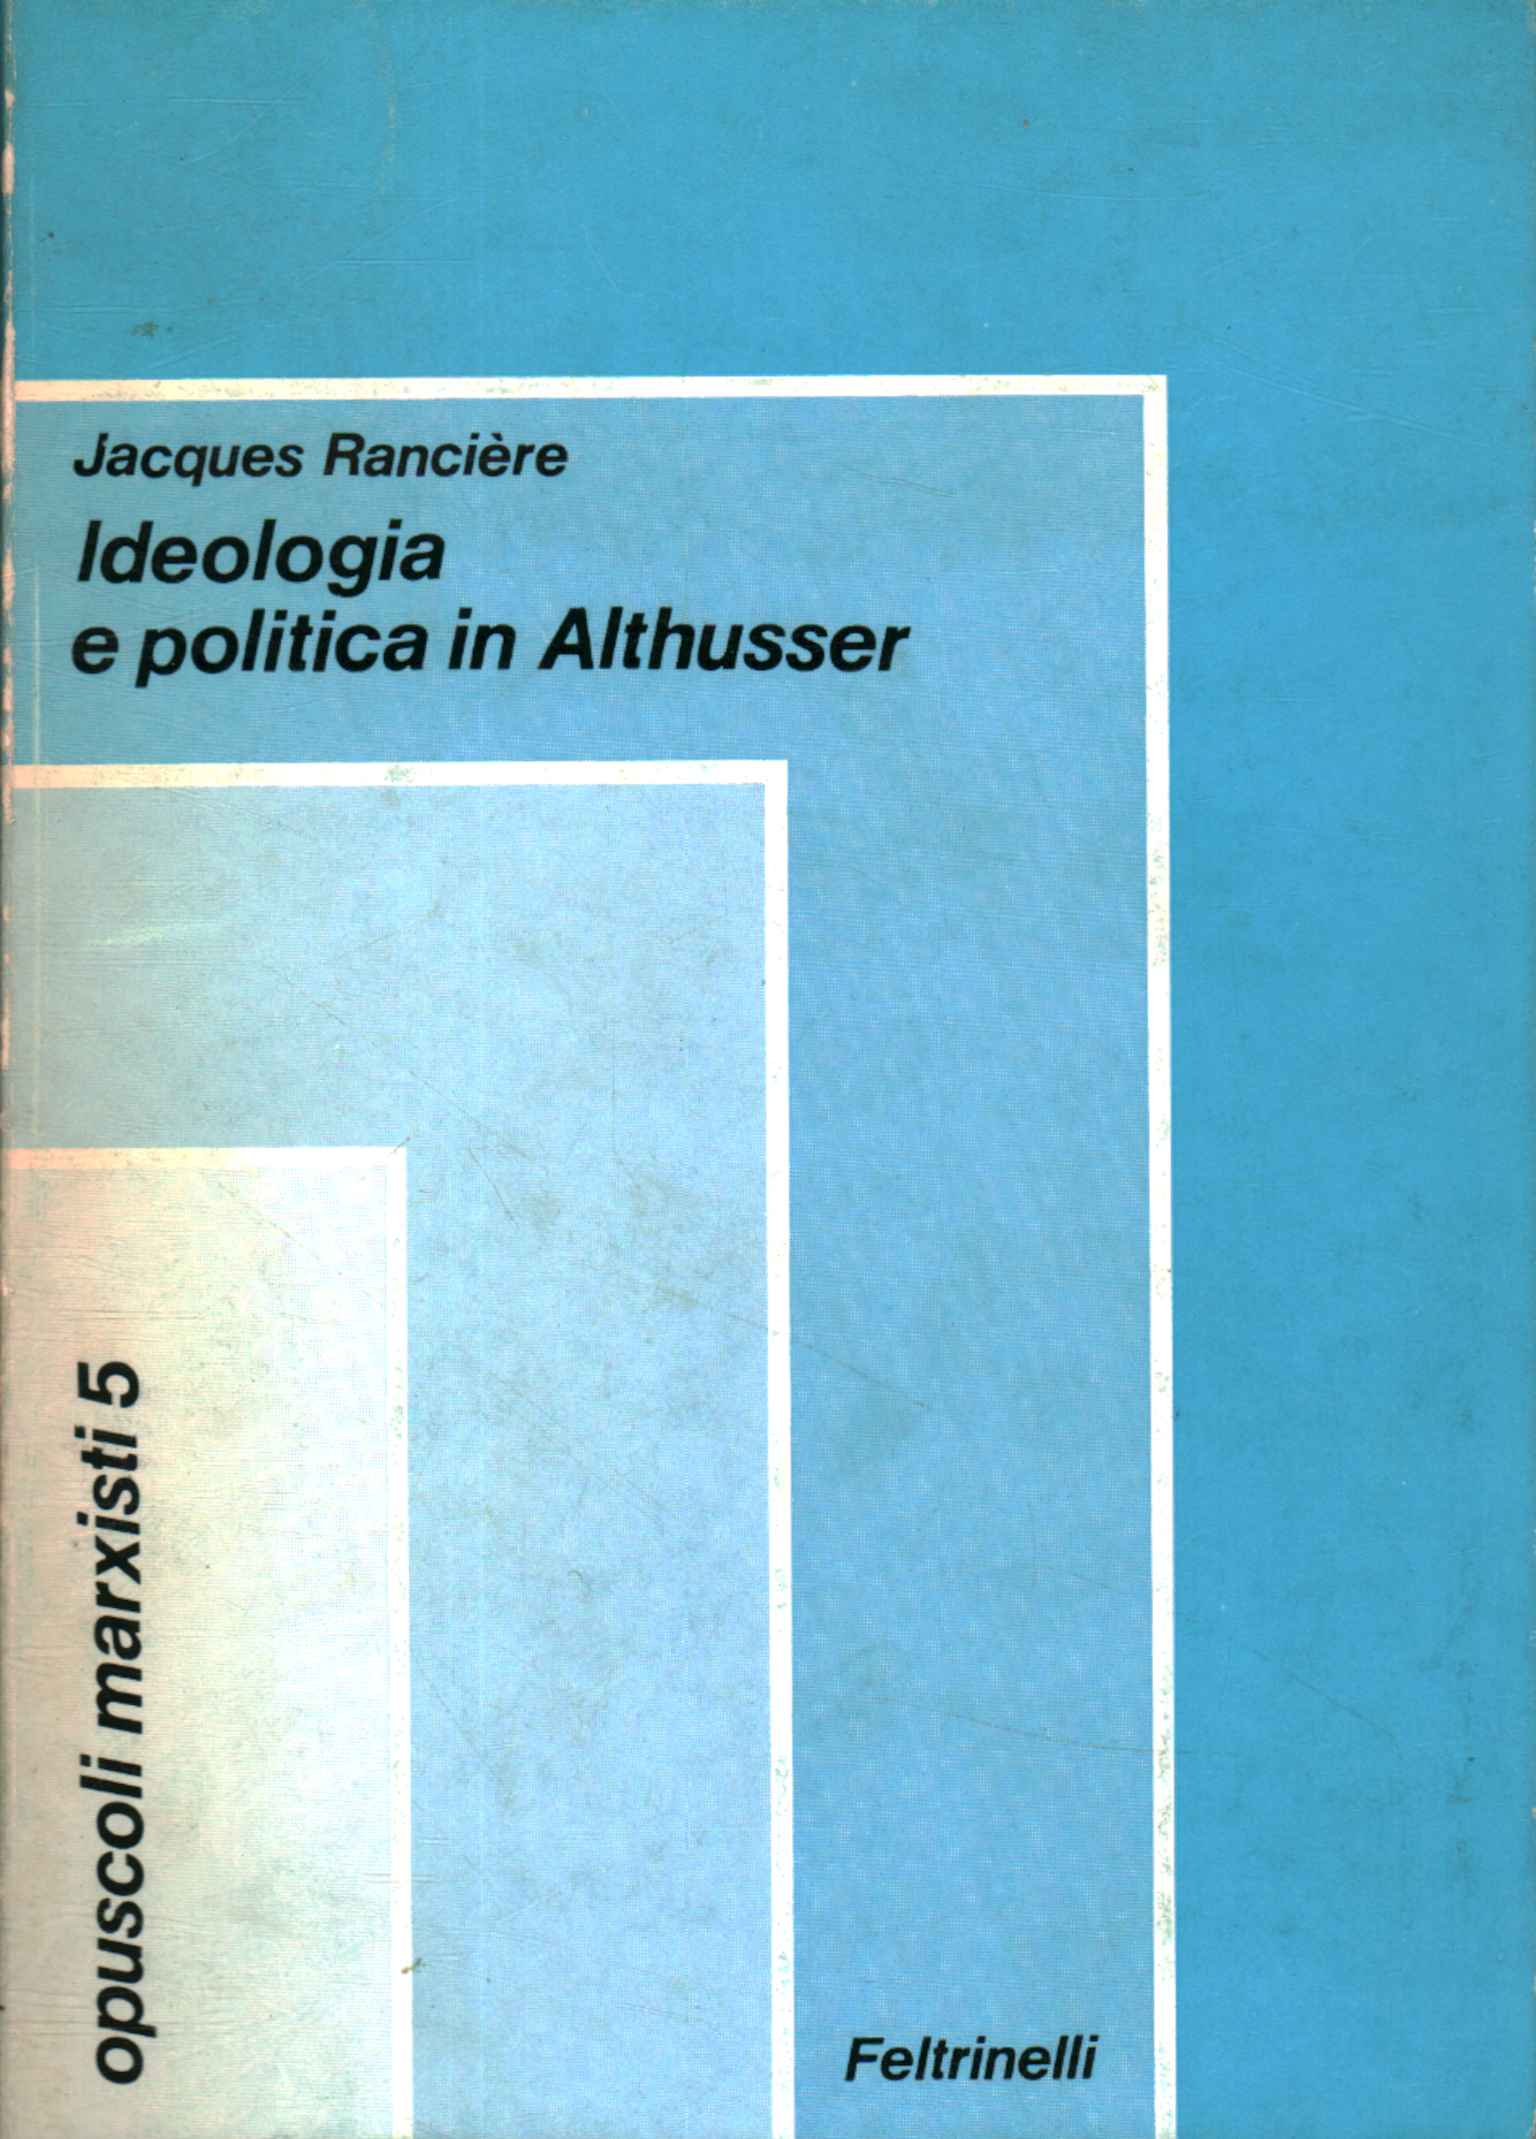 Books - Philosophy - Contemporary, Ideology and politics in Althusser